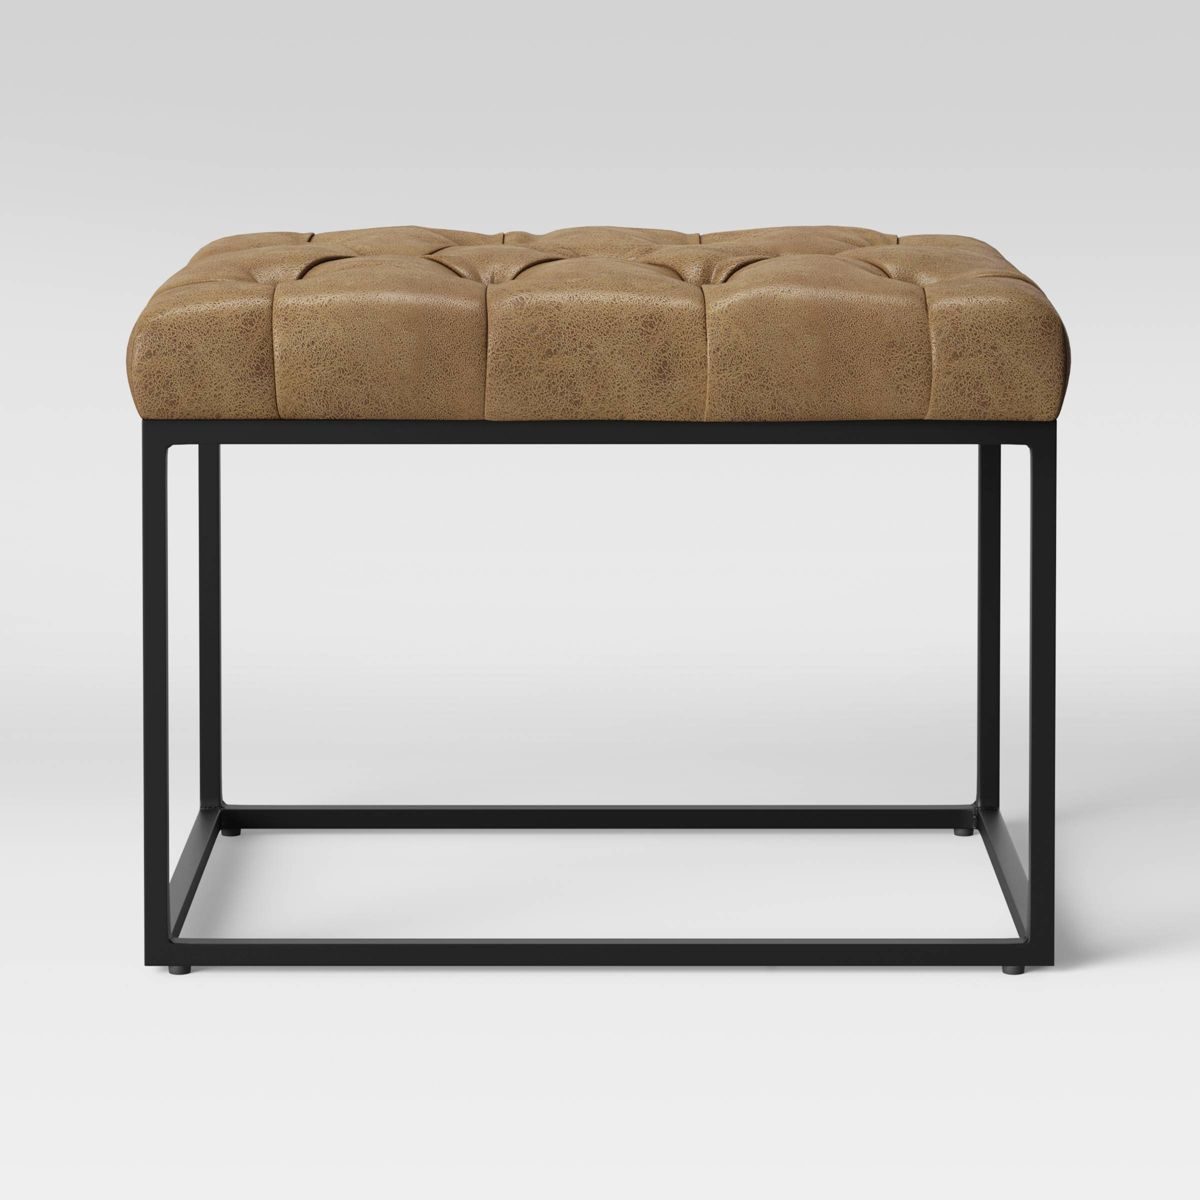 Trubeck Tufted Metal Base Ottoman Faux Leather Brown - Threshold™ | Target